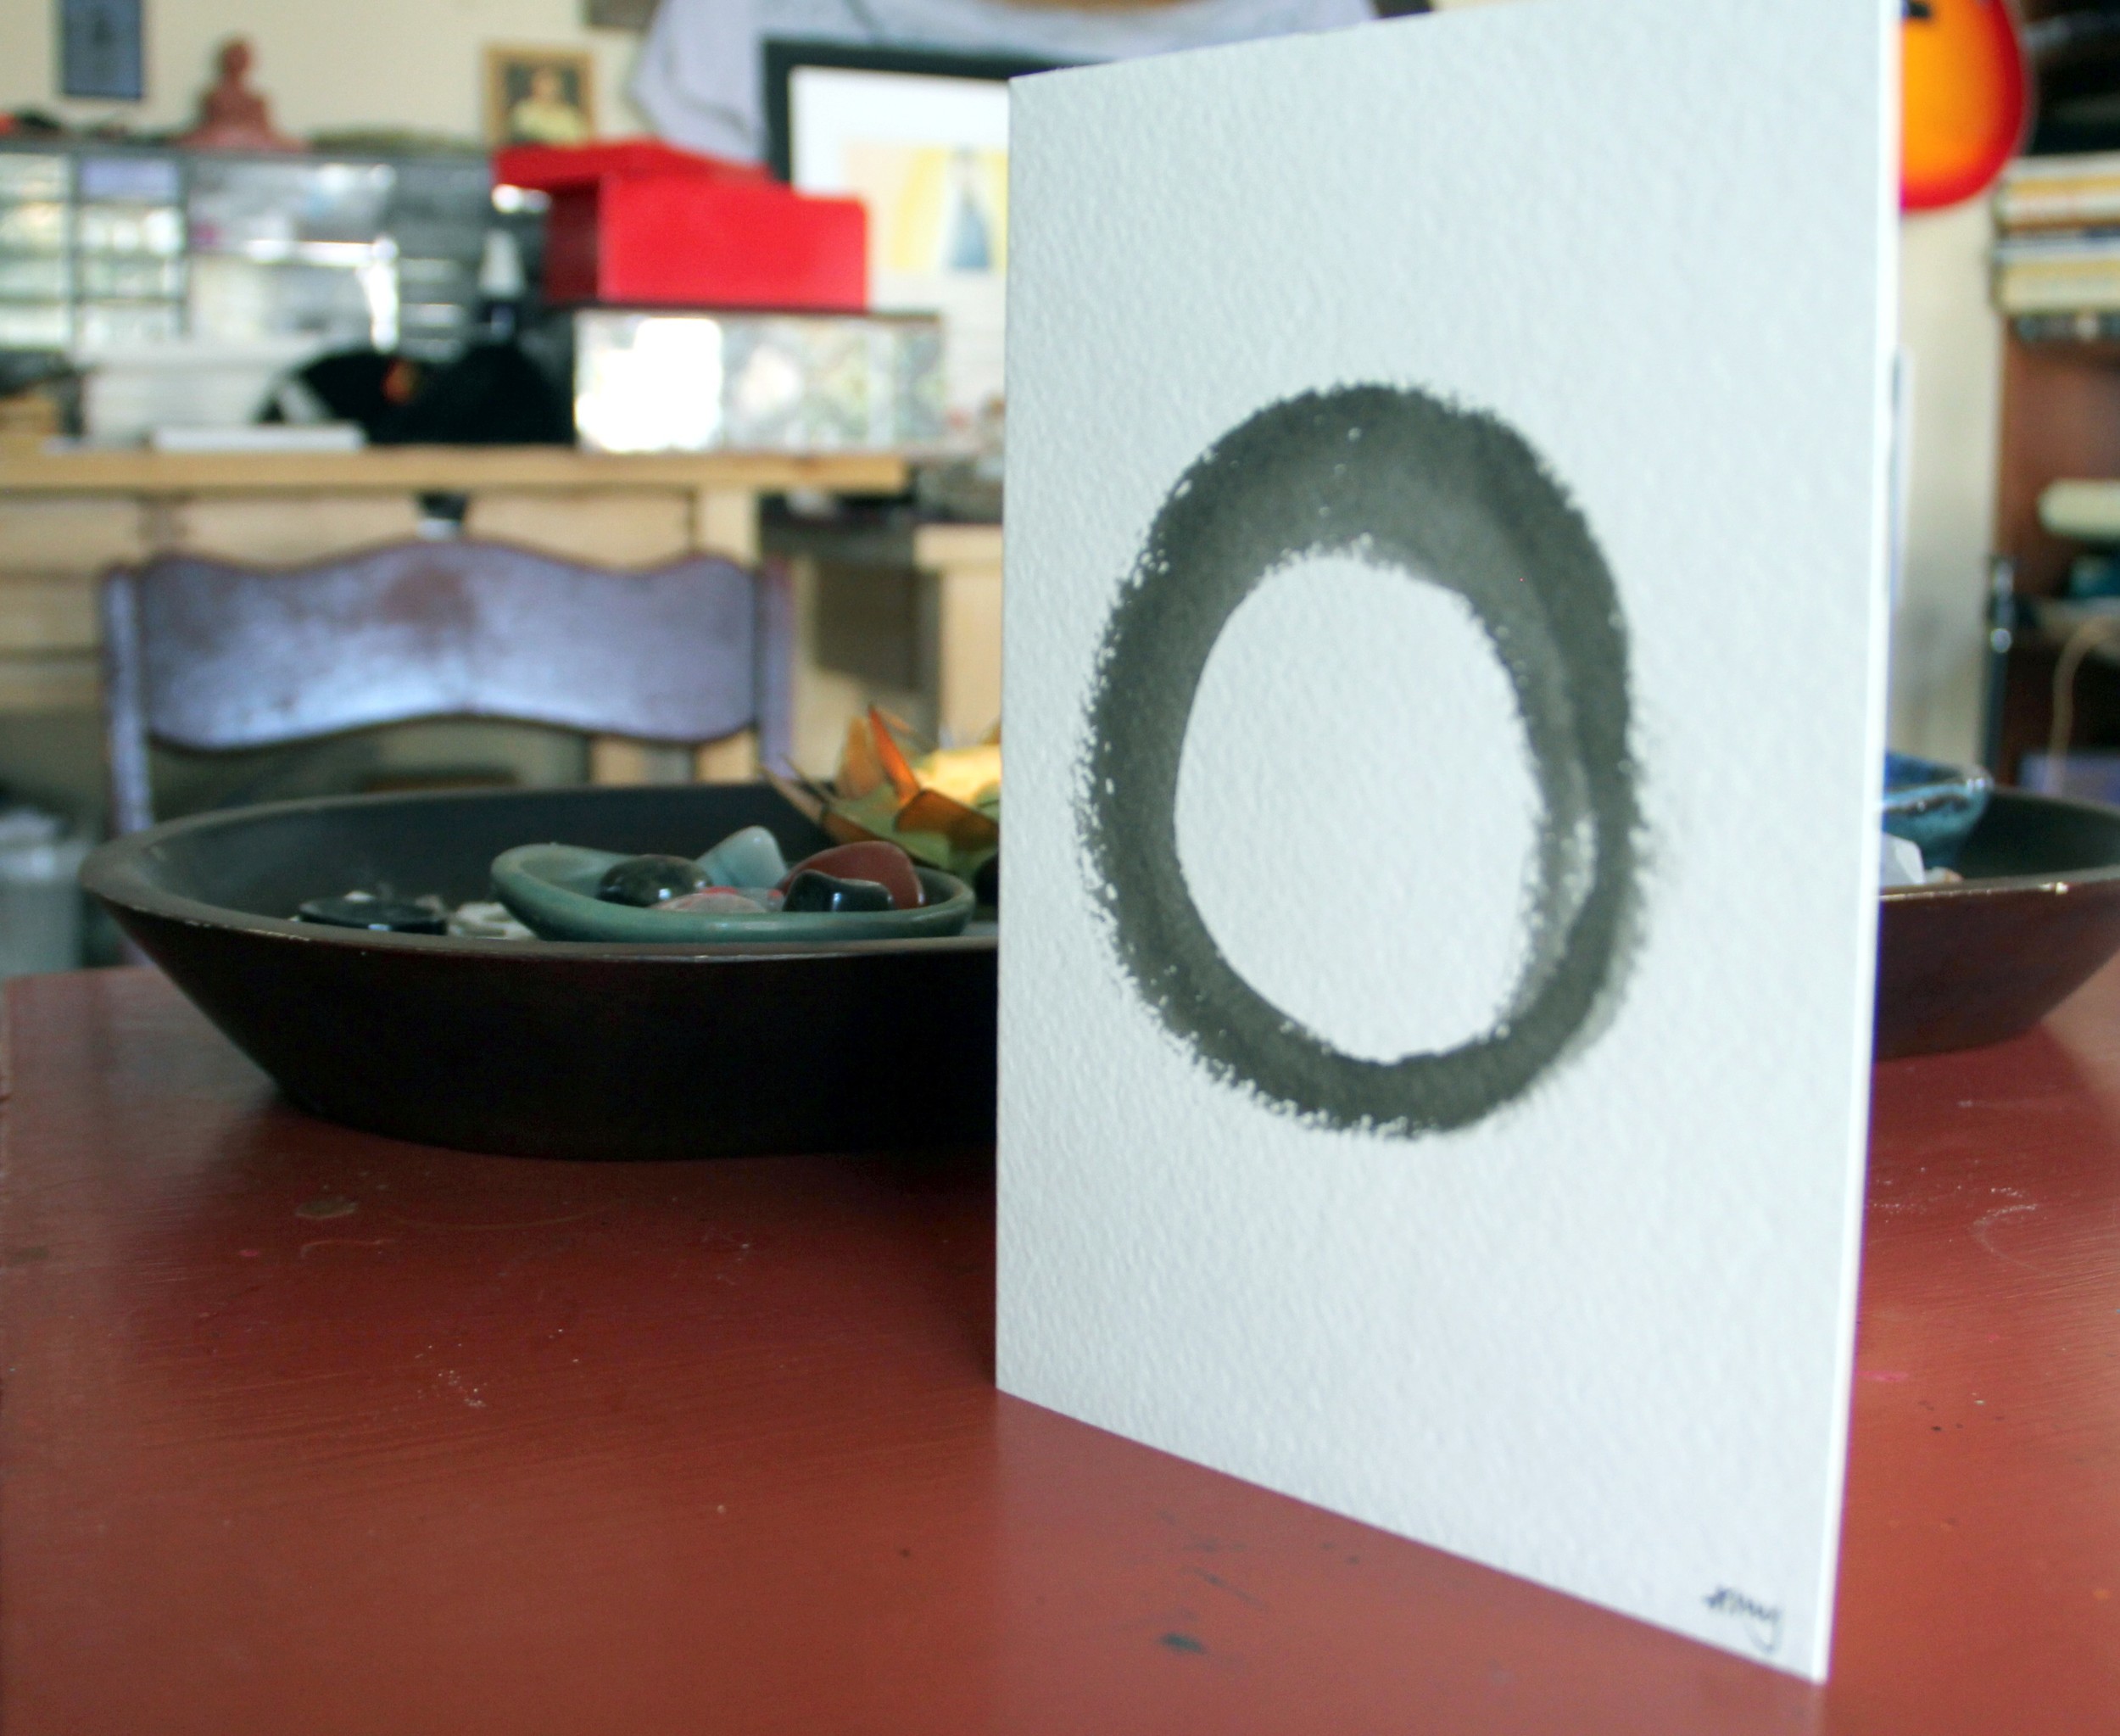  enso meditation remains a strong part of my meditation practice. 